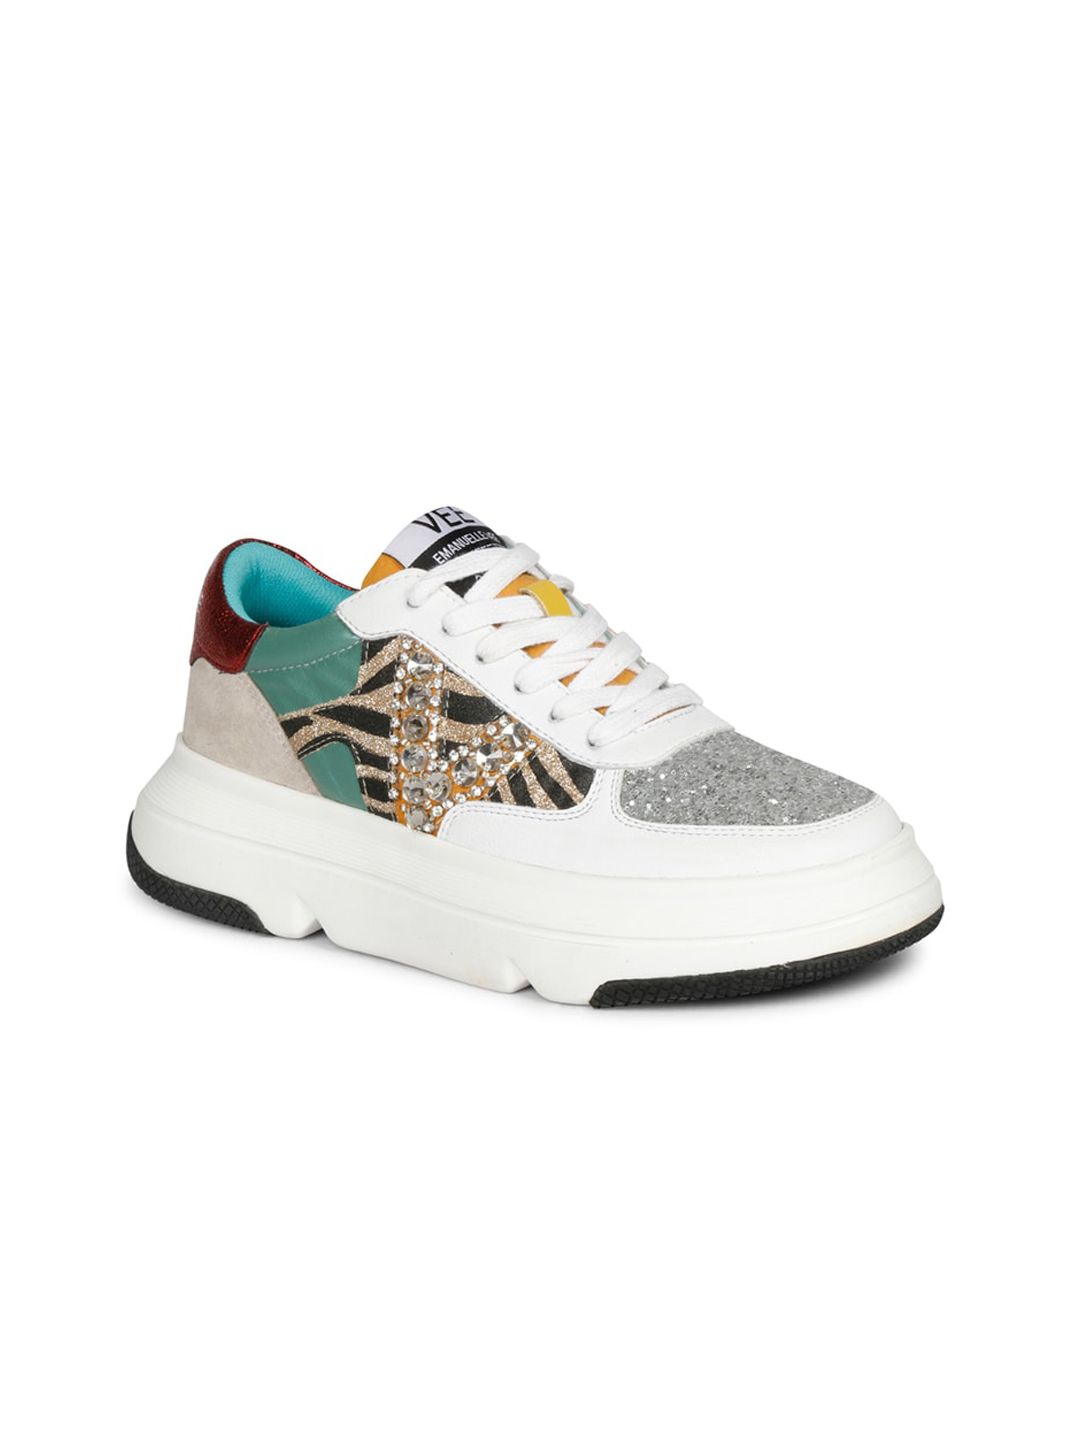 Saint G Women White Printed Leather Sneakers Price in India